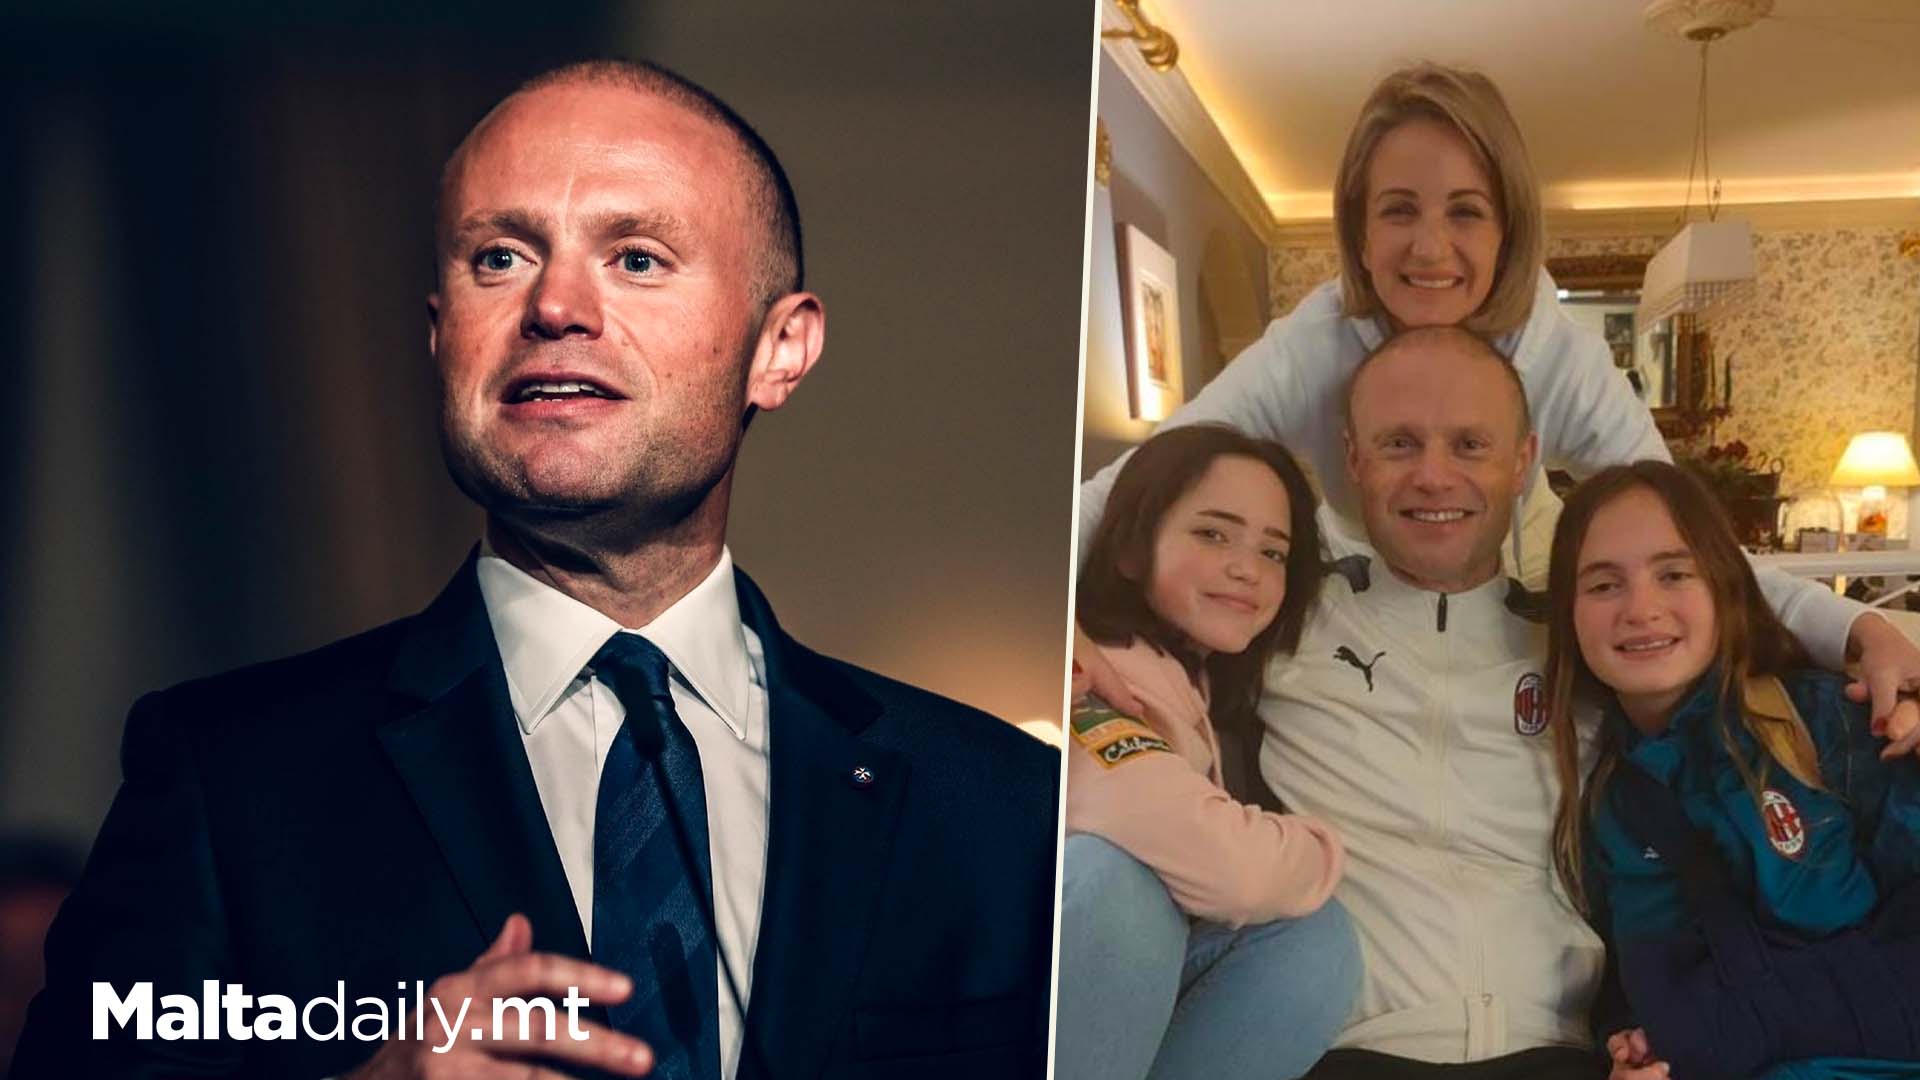 Former Prime Minister Joseph Muscat Turns 50 Years Old